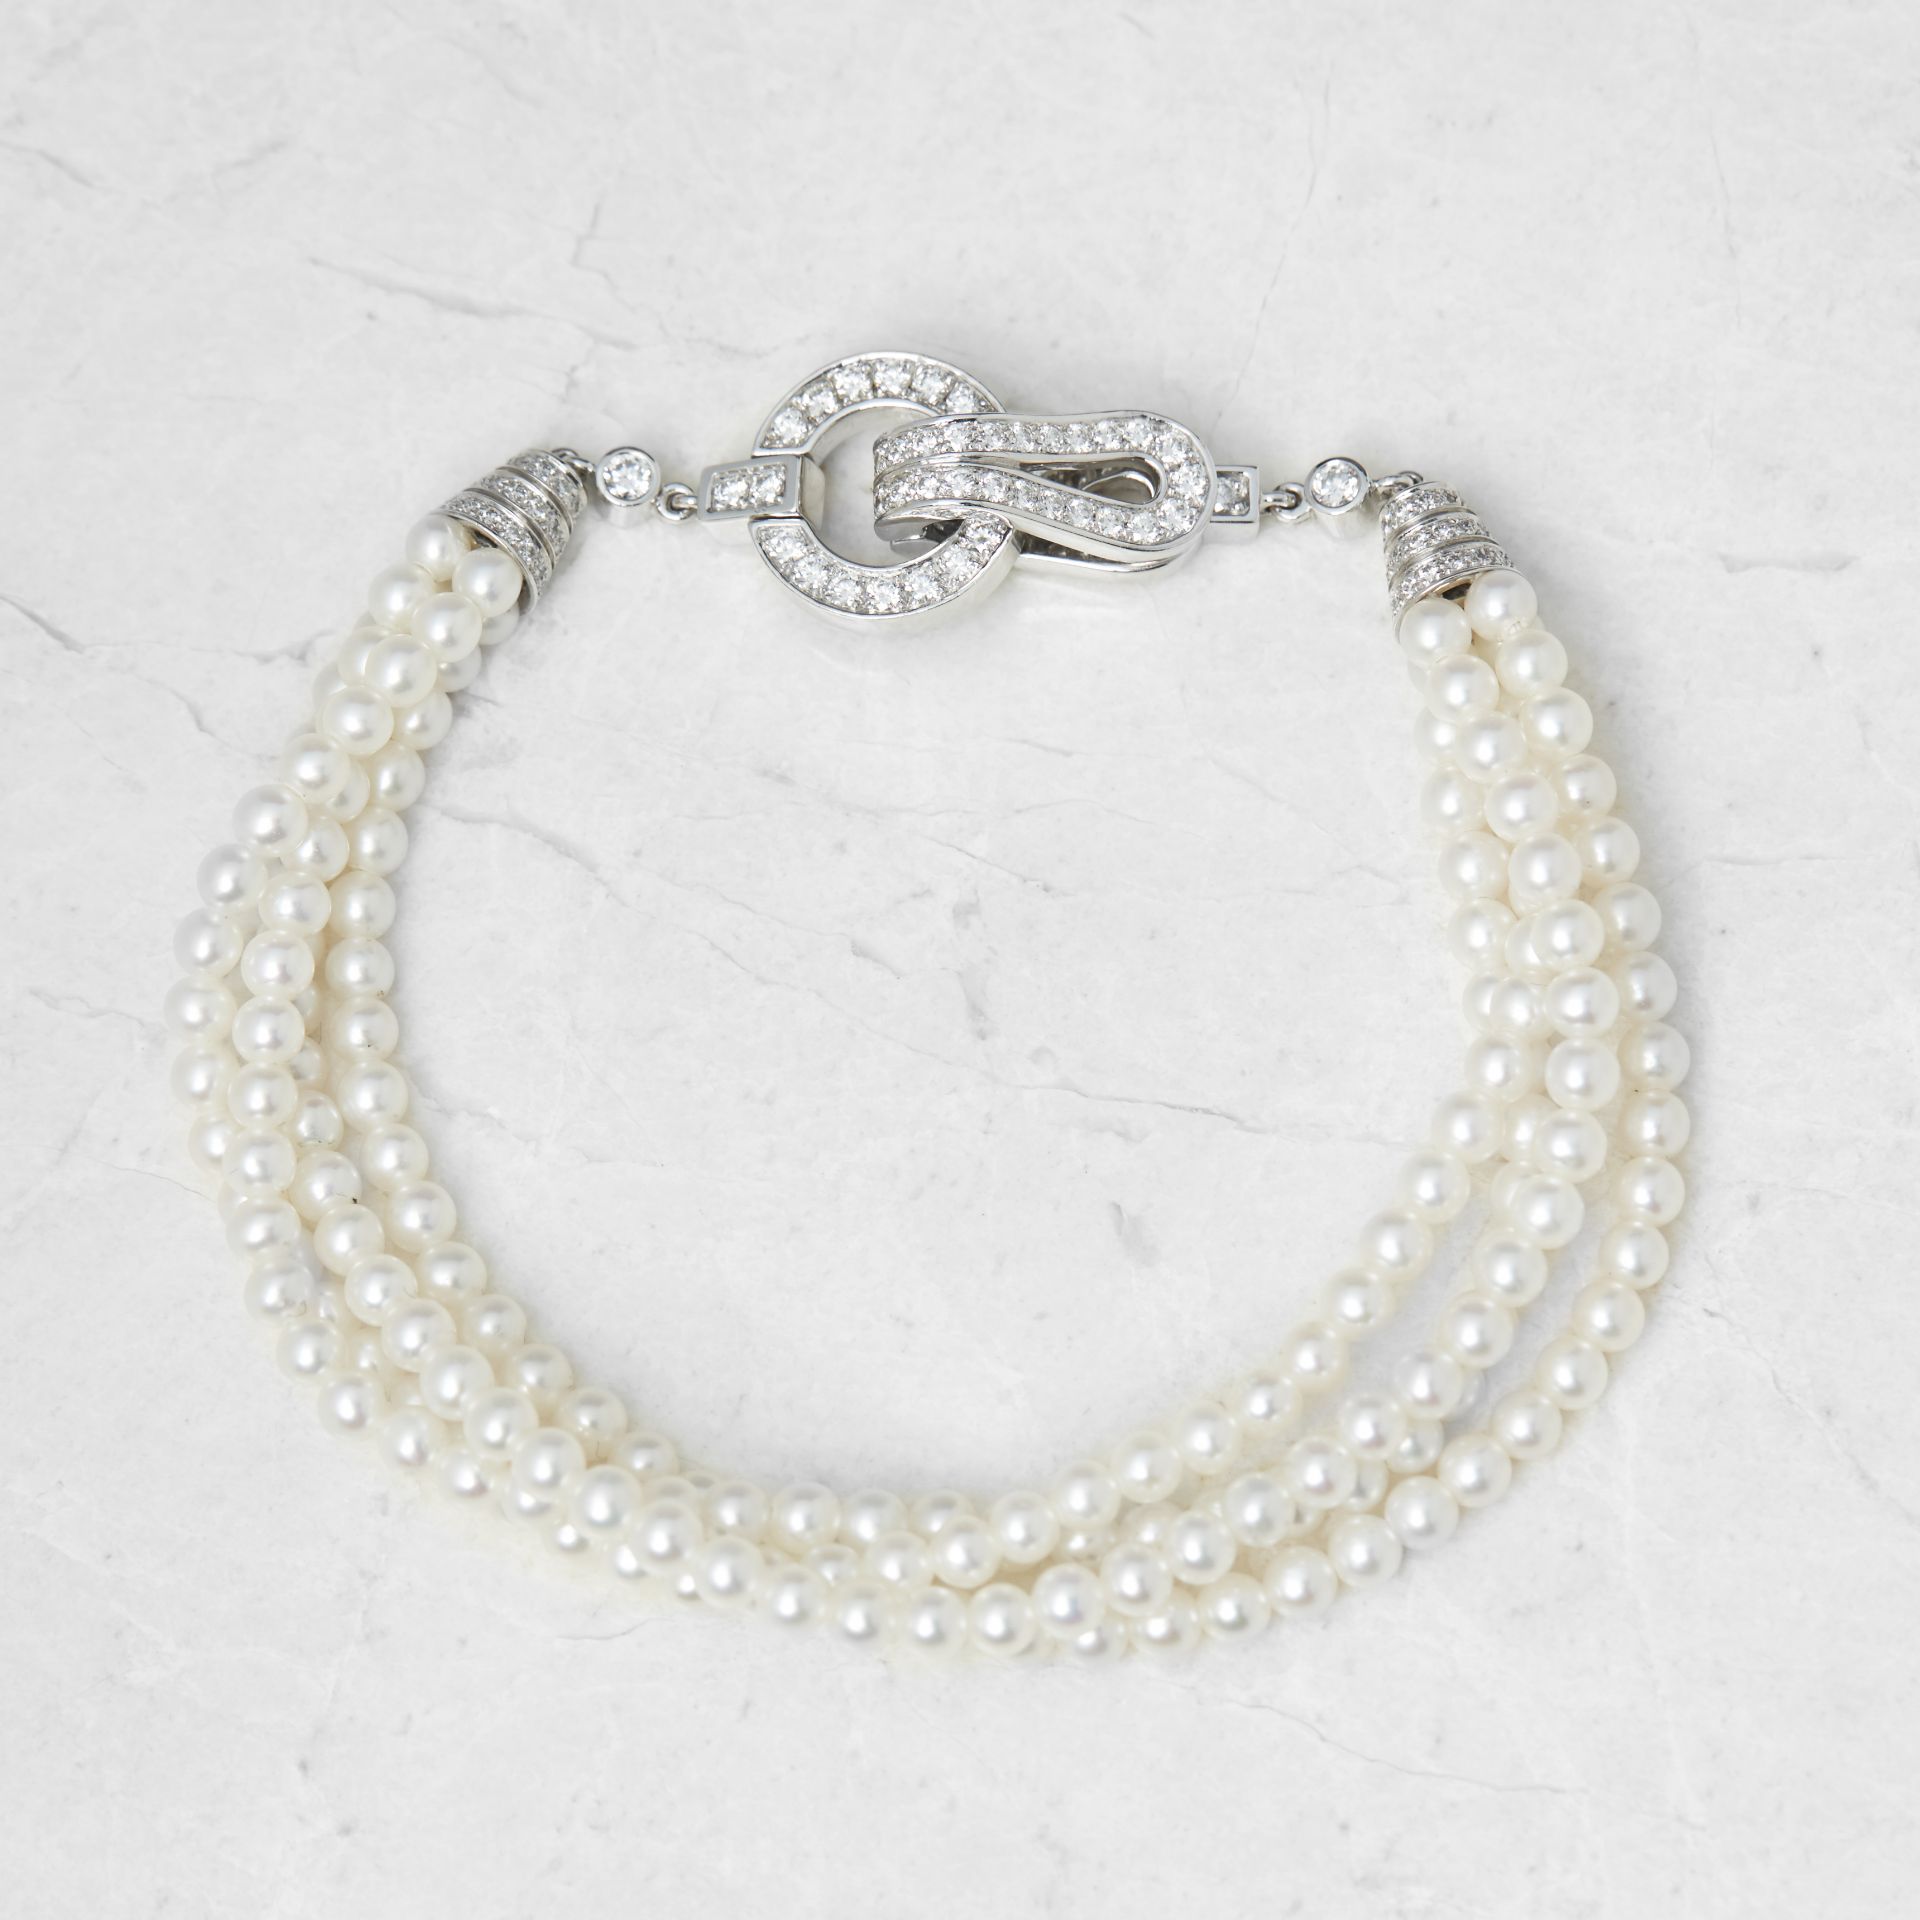 Cartier 18k White Gold Cultured Pearl & 1.02ct Diamond Agrafe Bracelet - Image 7 of 7